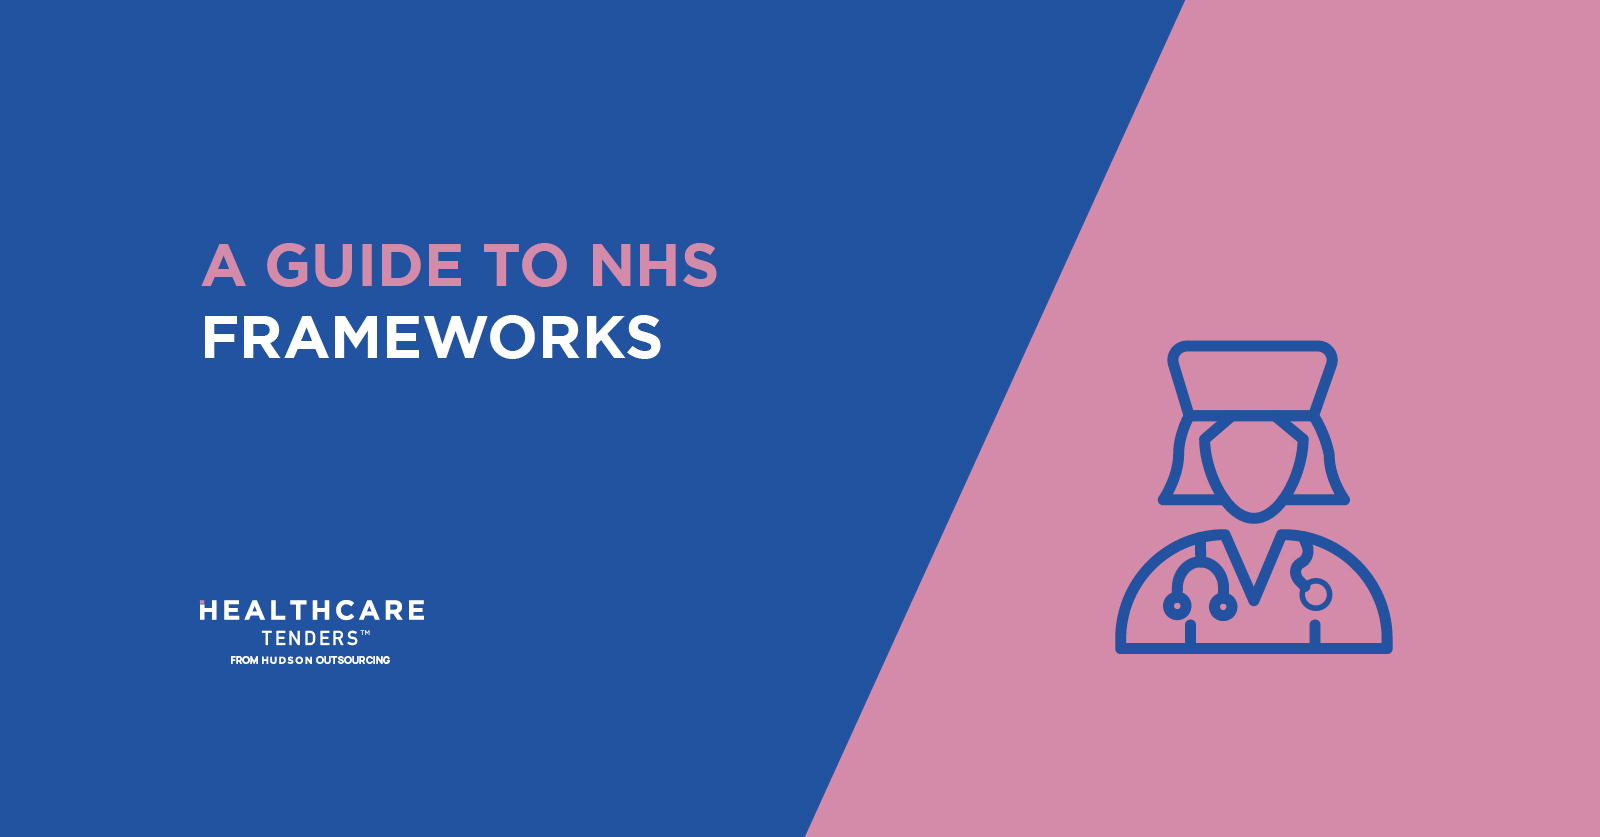 NHS Frameworks: How to Succeed